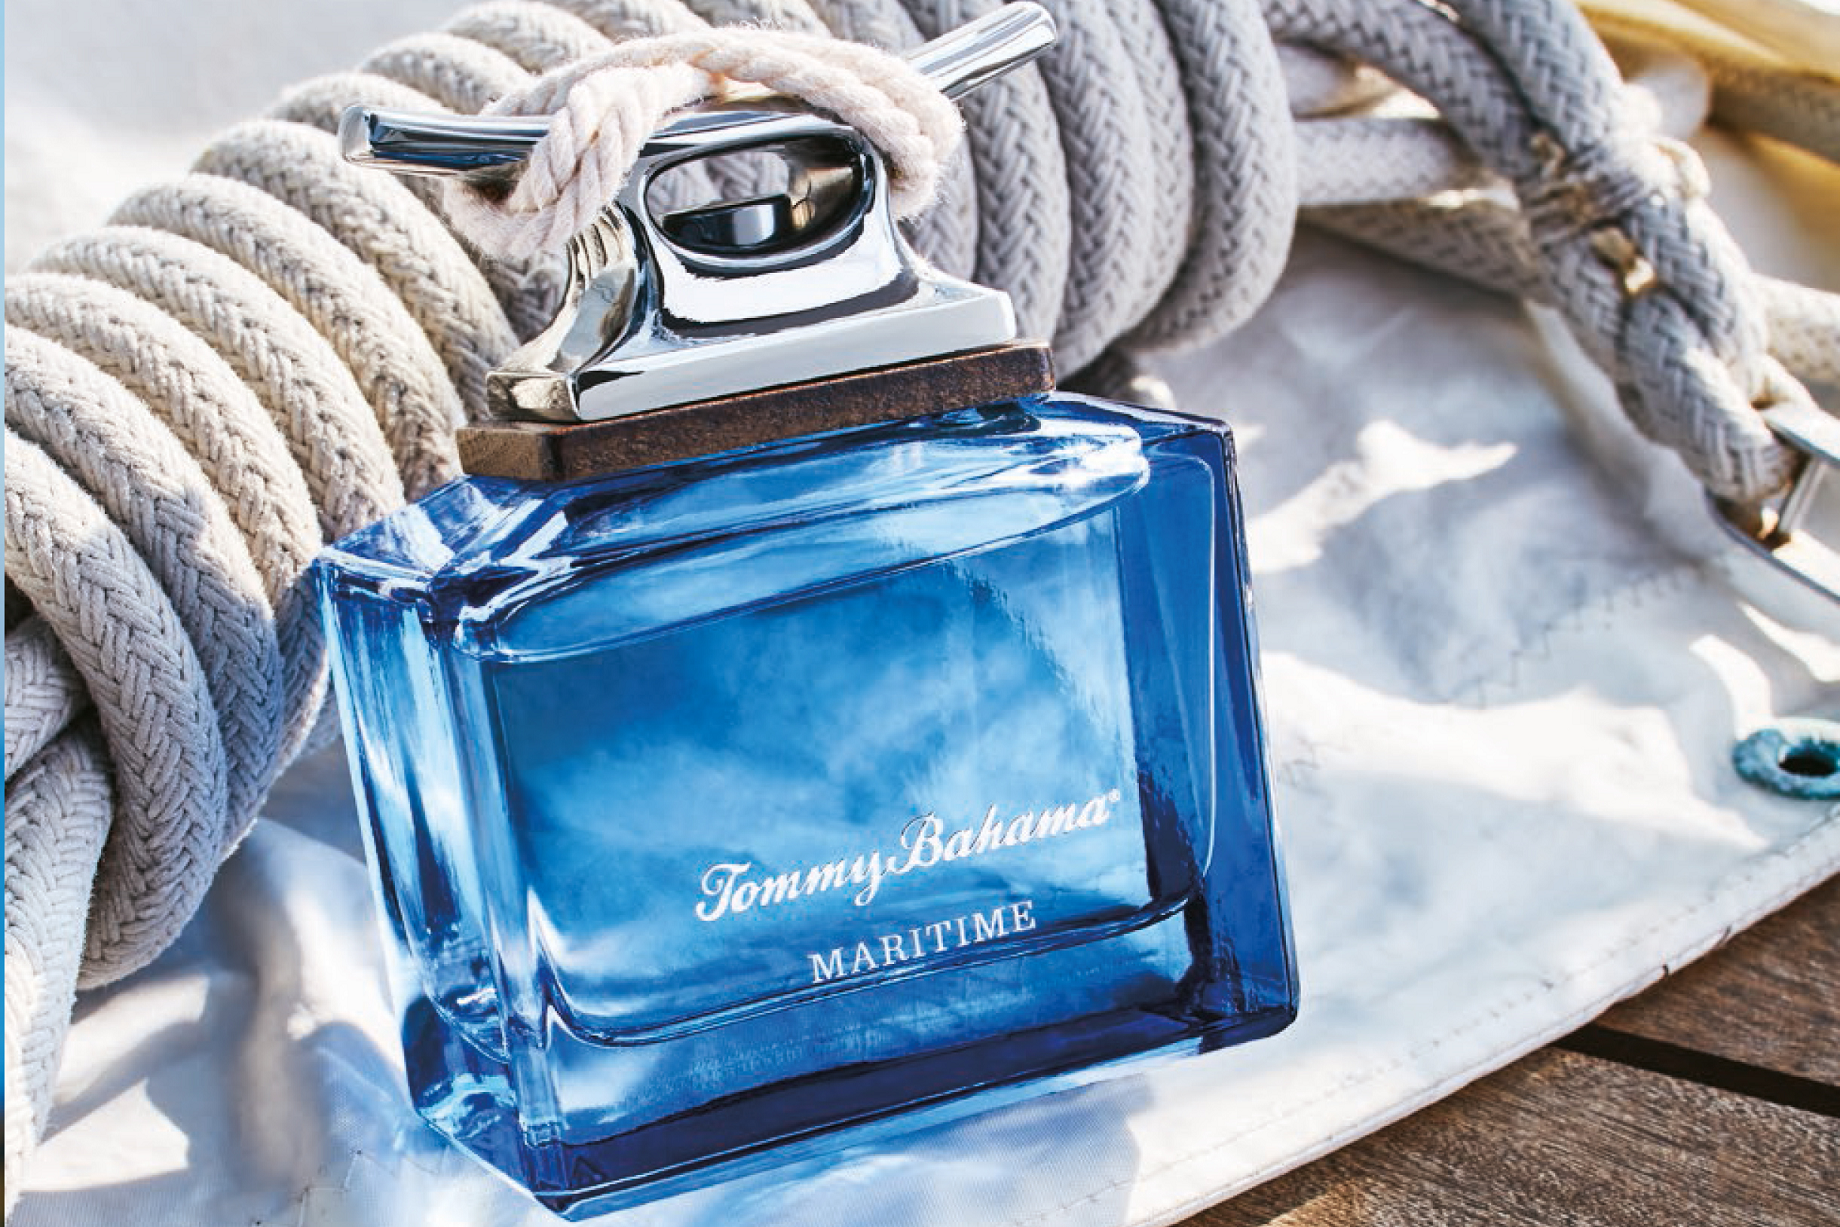 maritime by tommy bahama